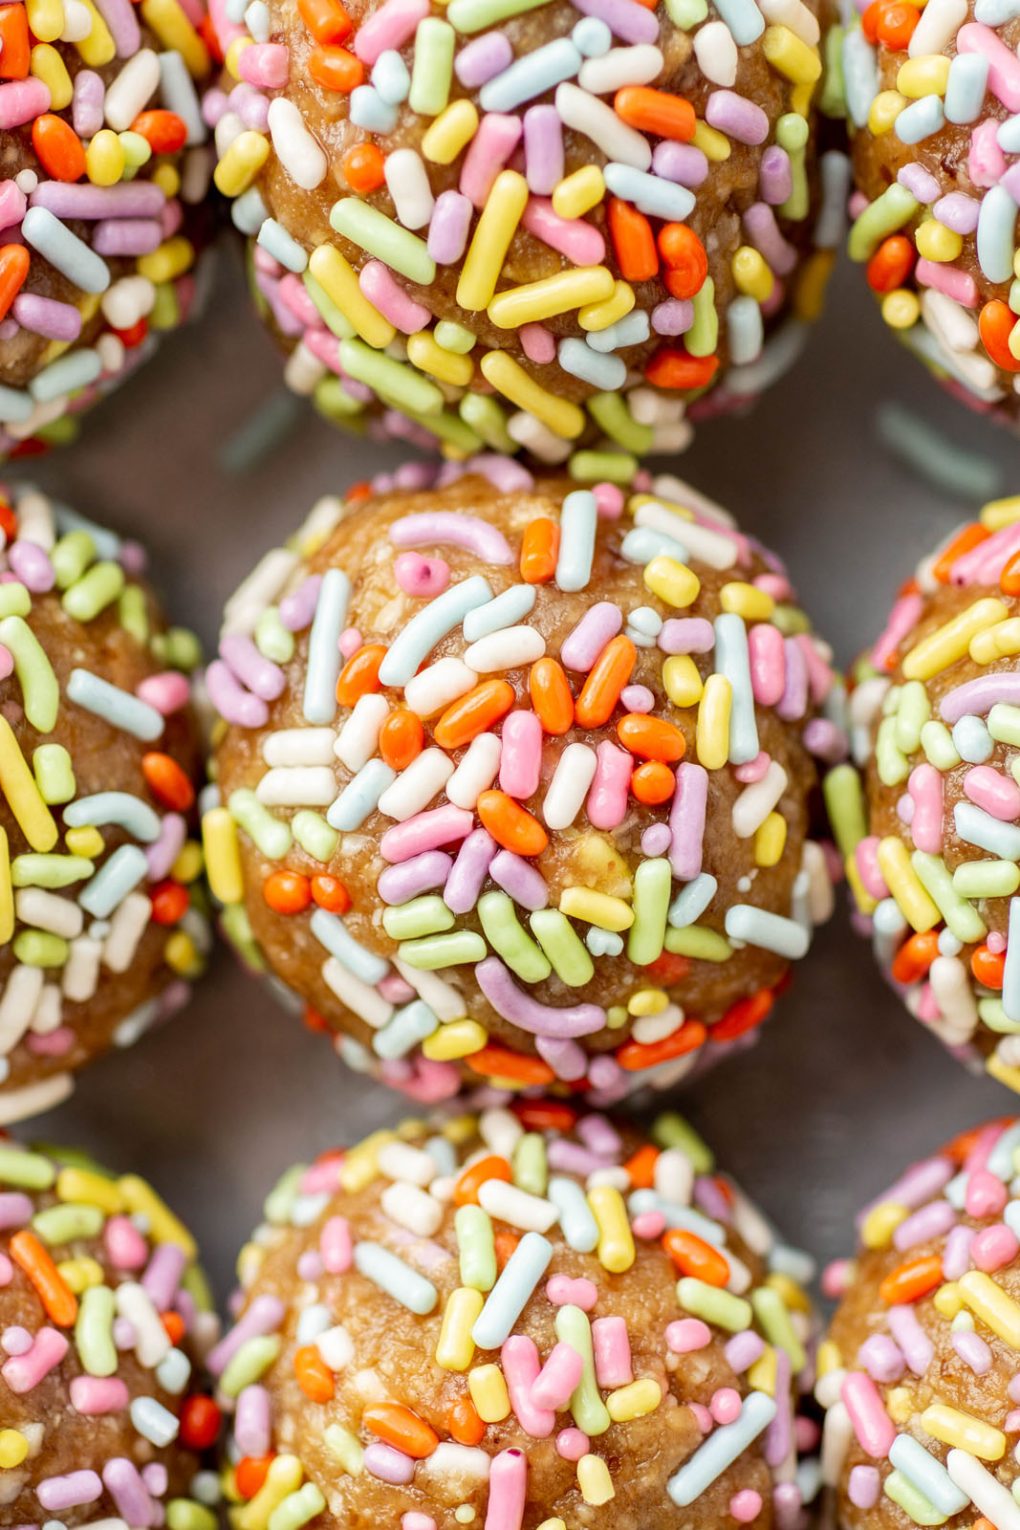 Super close up shot of rainbow sprinkle coated energy bites lined up next to each other.